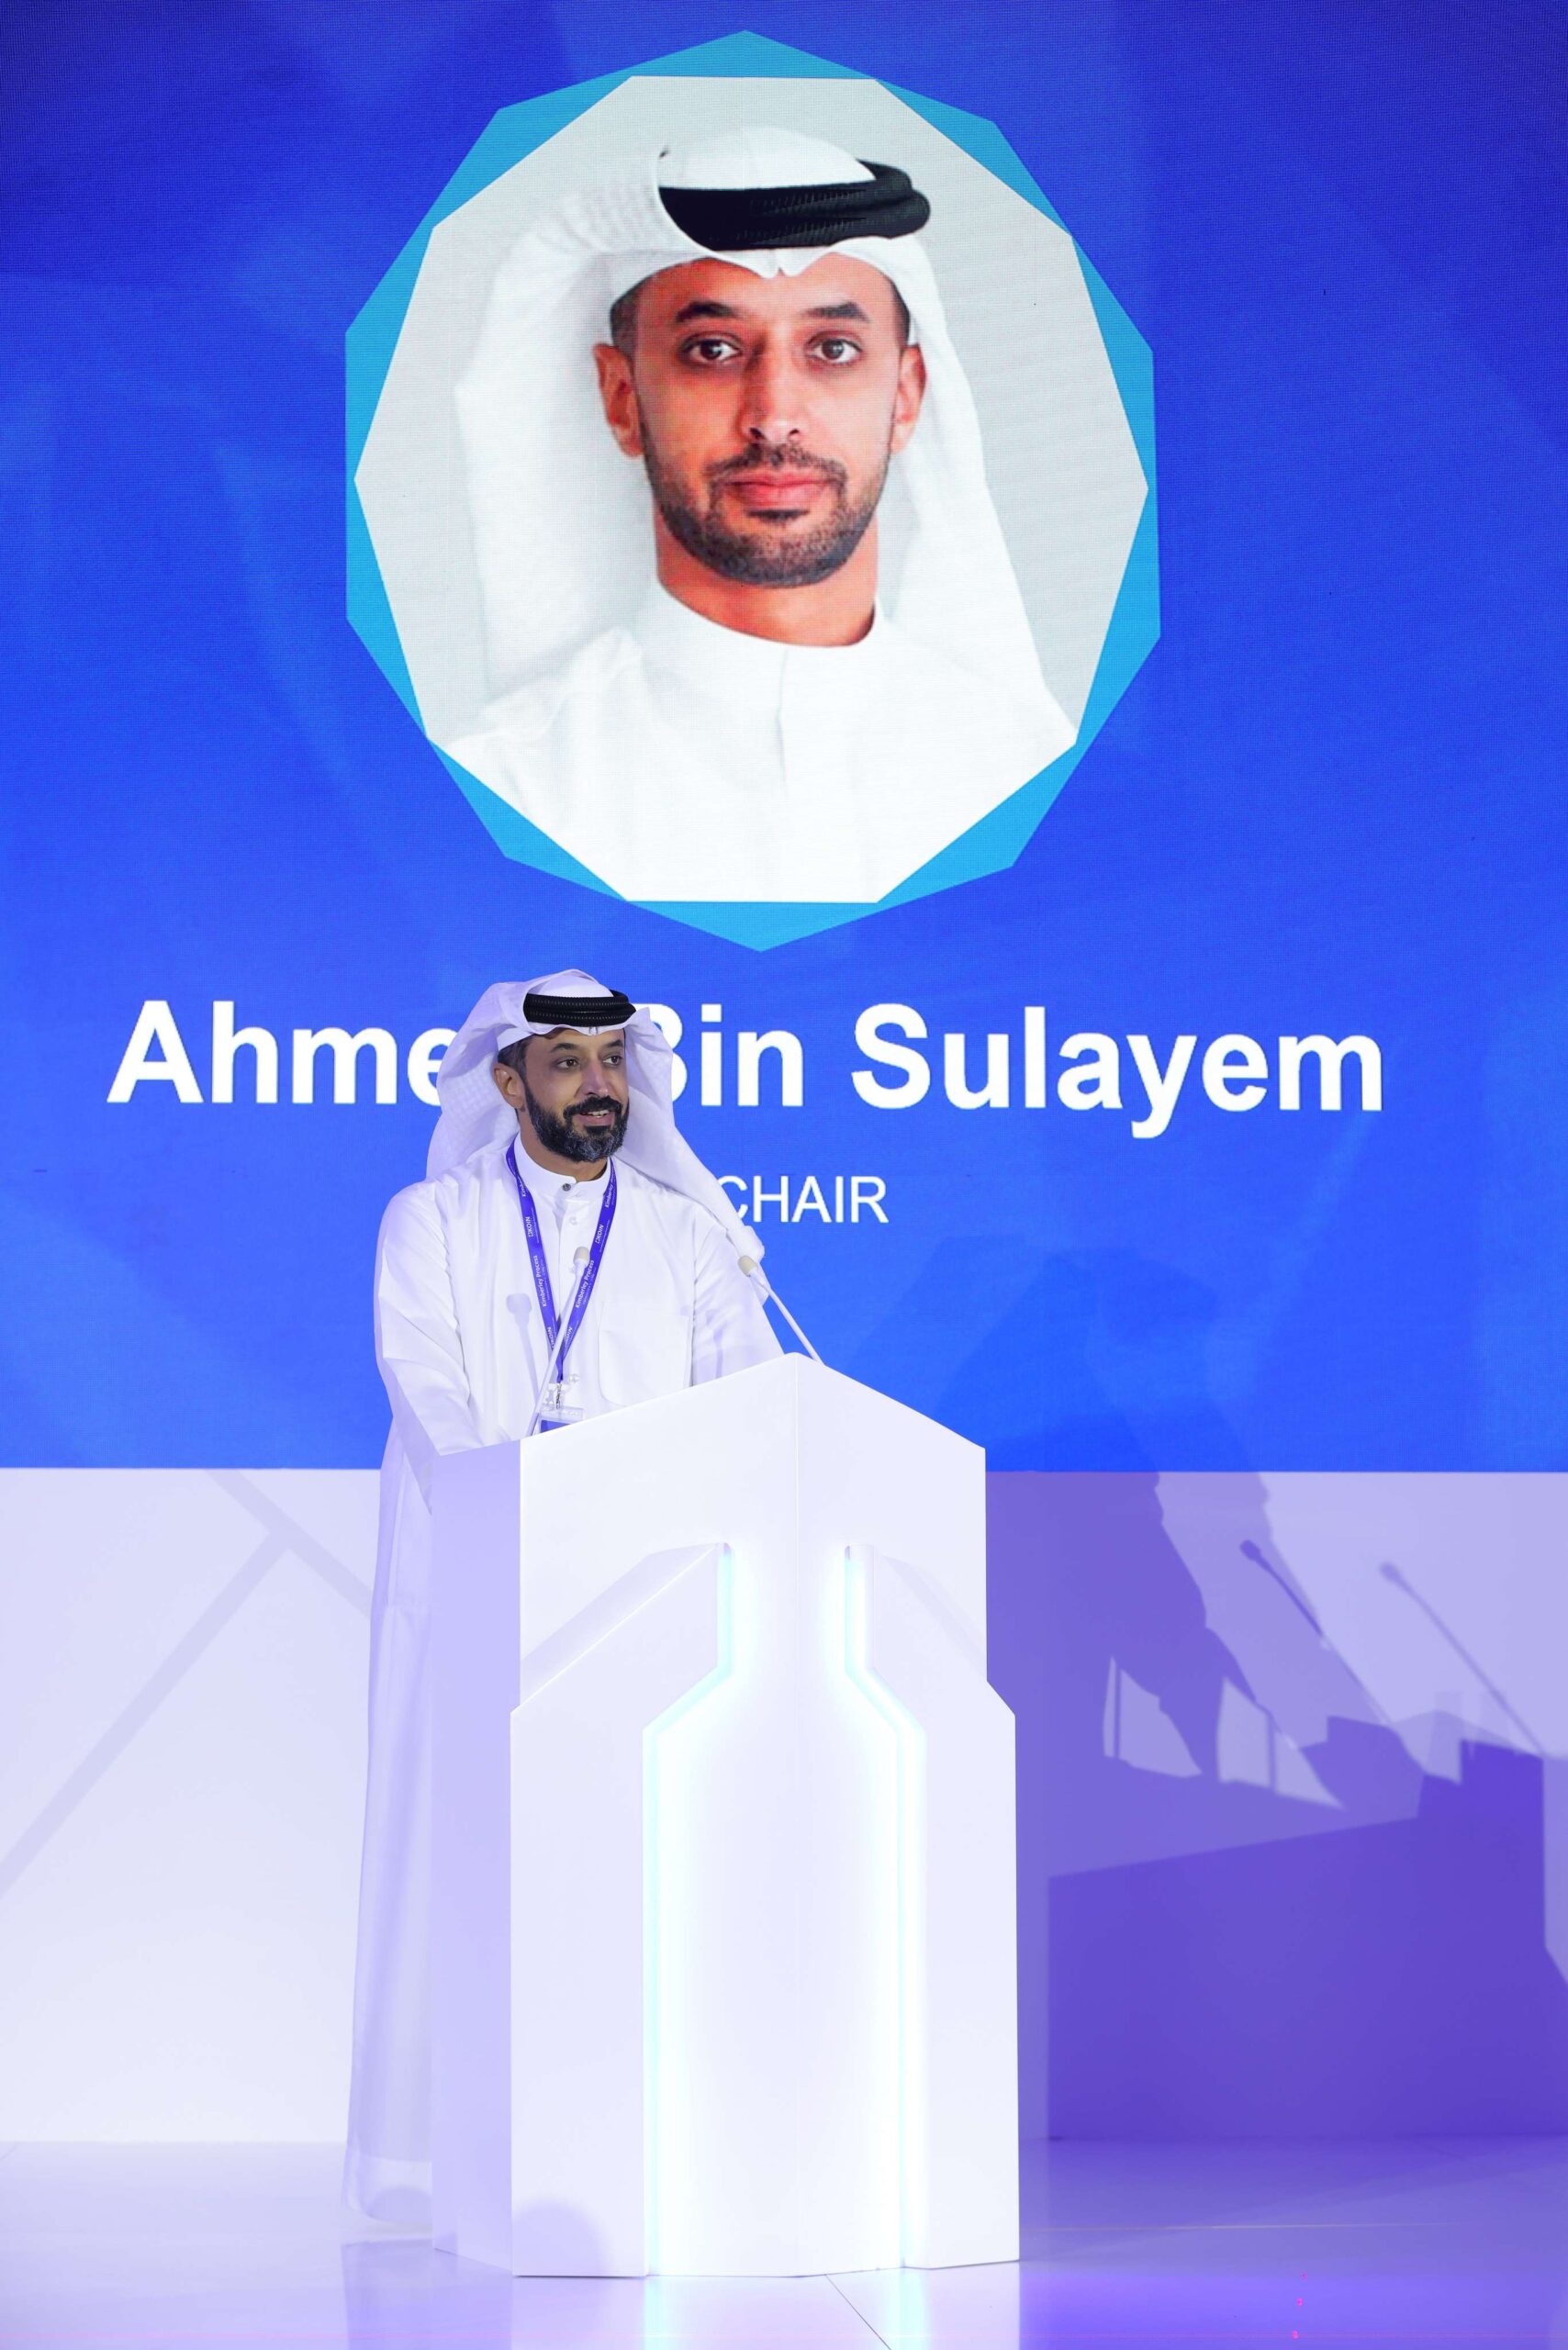 Ahmed Bin Sulayem UAEs Chair of the Kimberley Process scaled